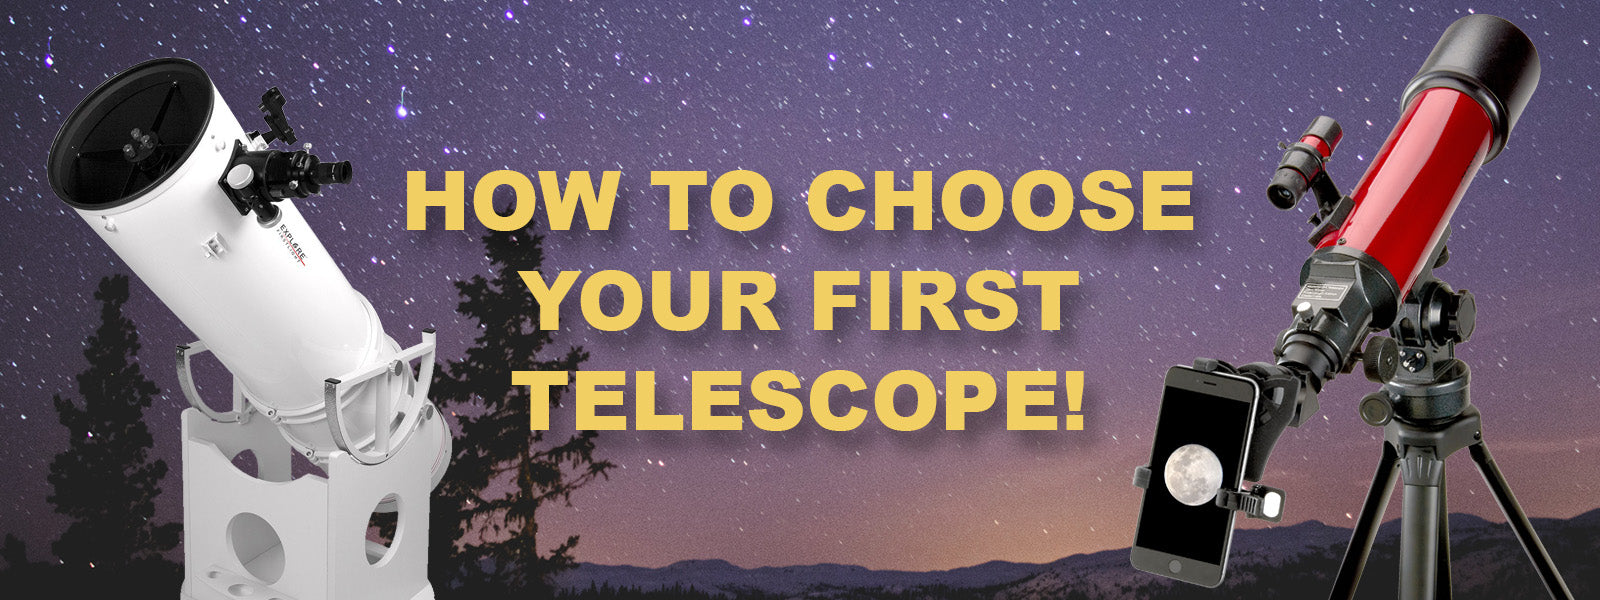 How To Choose Your First Telescope